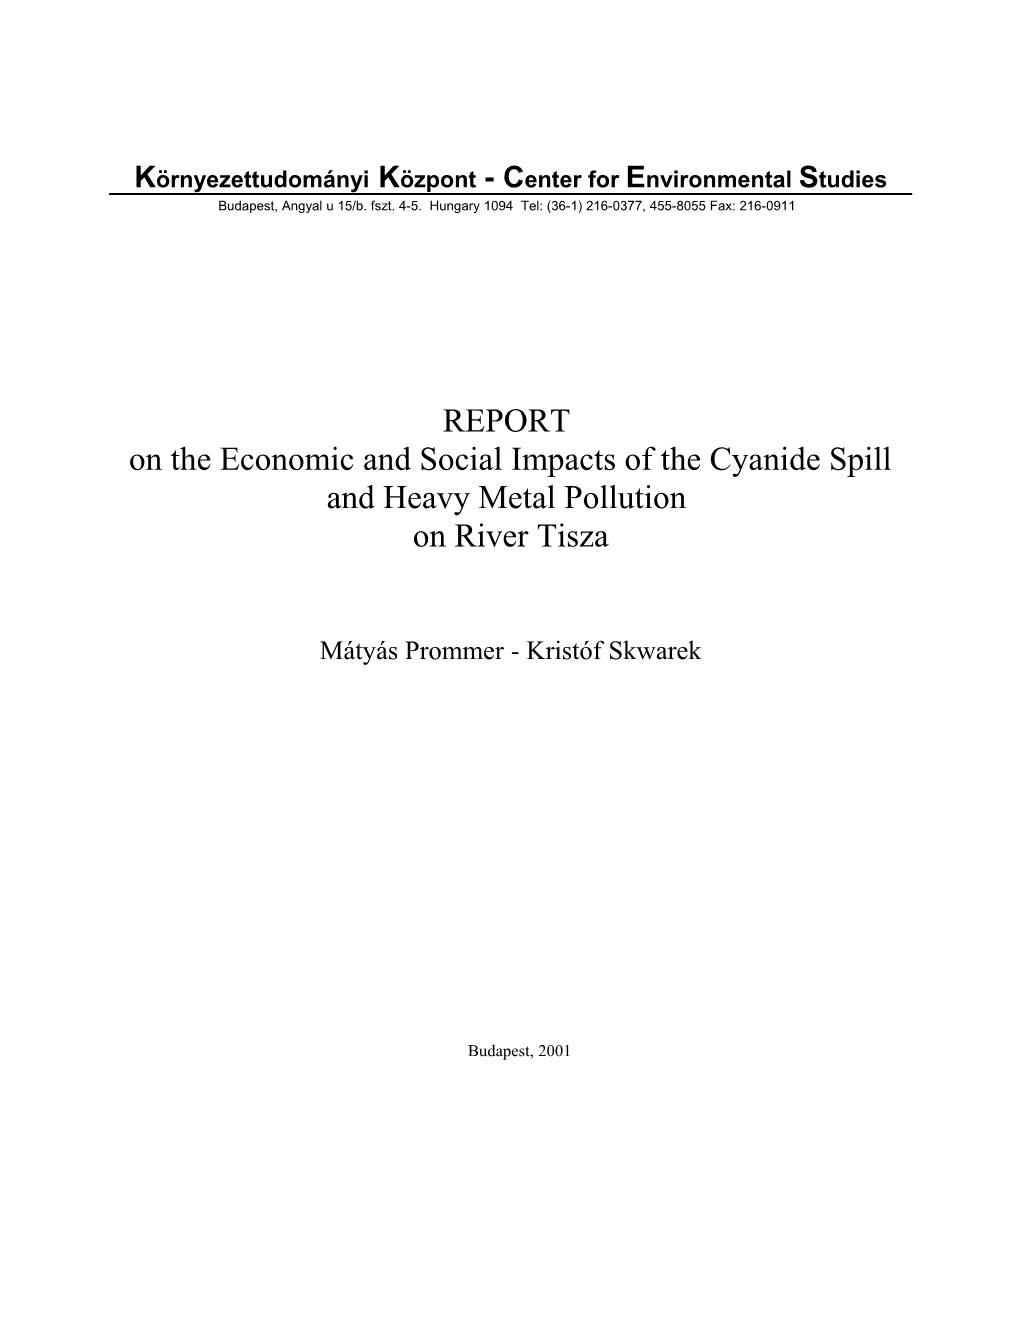 Report on the Social and Economic Impacts of the Cyanide and Heavy Metal Pollution of The